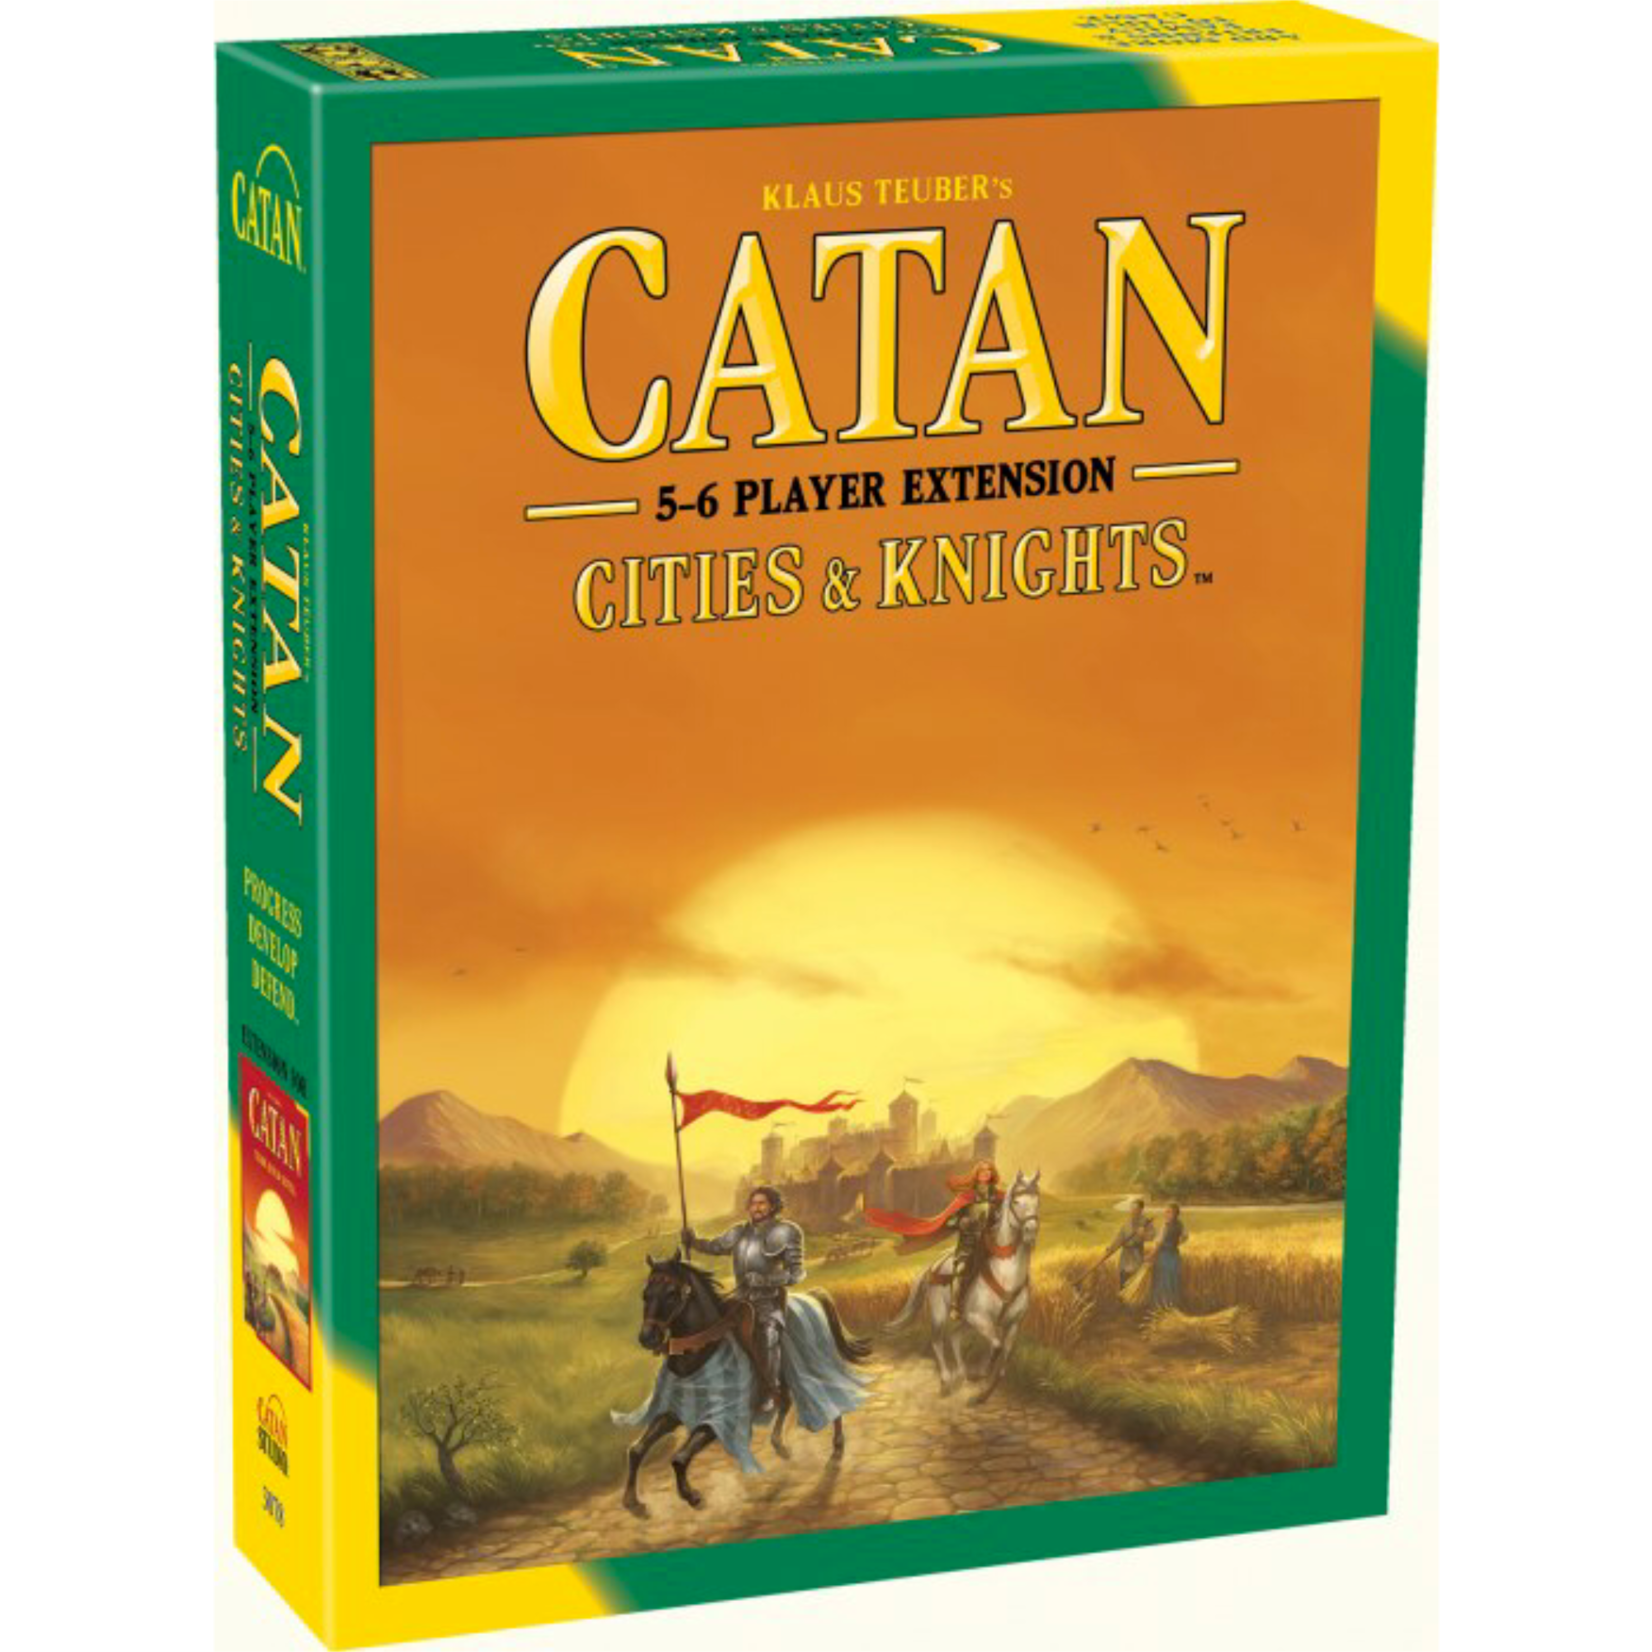 Catan Studio Catan Cities and Knights Expansion 5-6 Player Extension